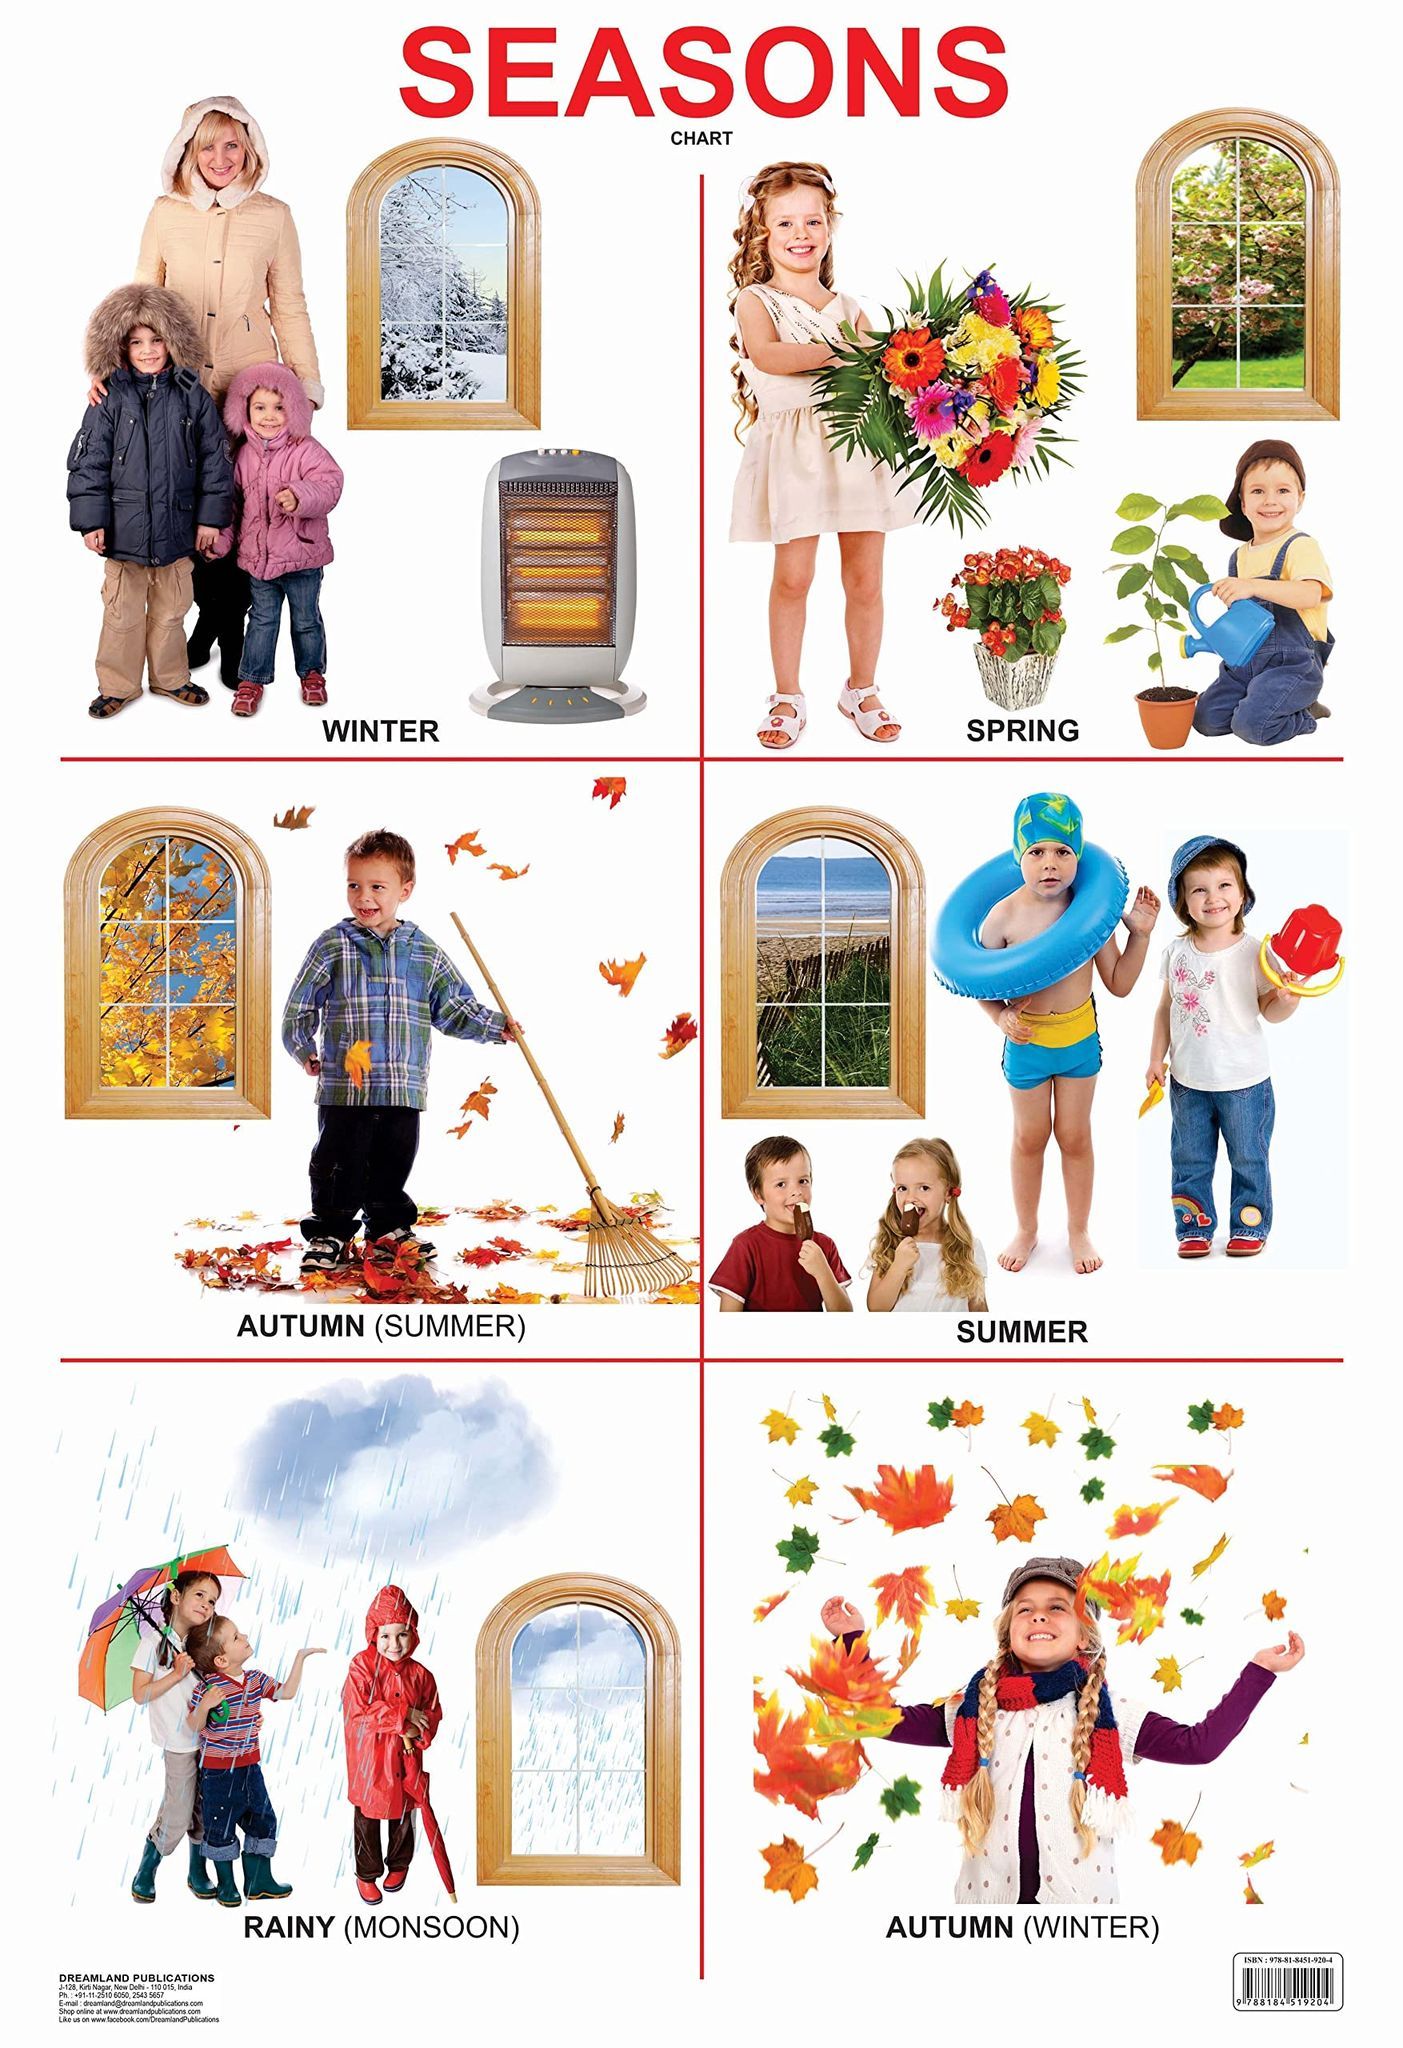 Seasons Chart Educational Wall Chart For Kids - Both Side Hard Laminated (Size 48 x 73 cm) [Poster] Dreamland Publications